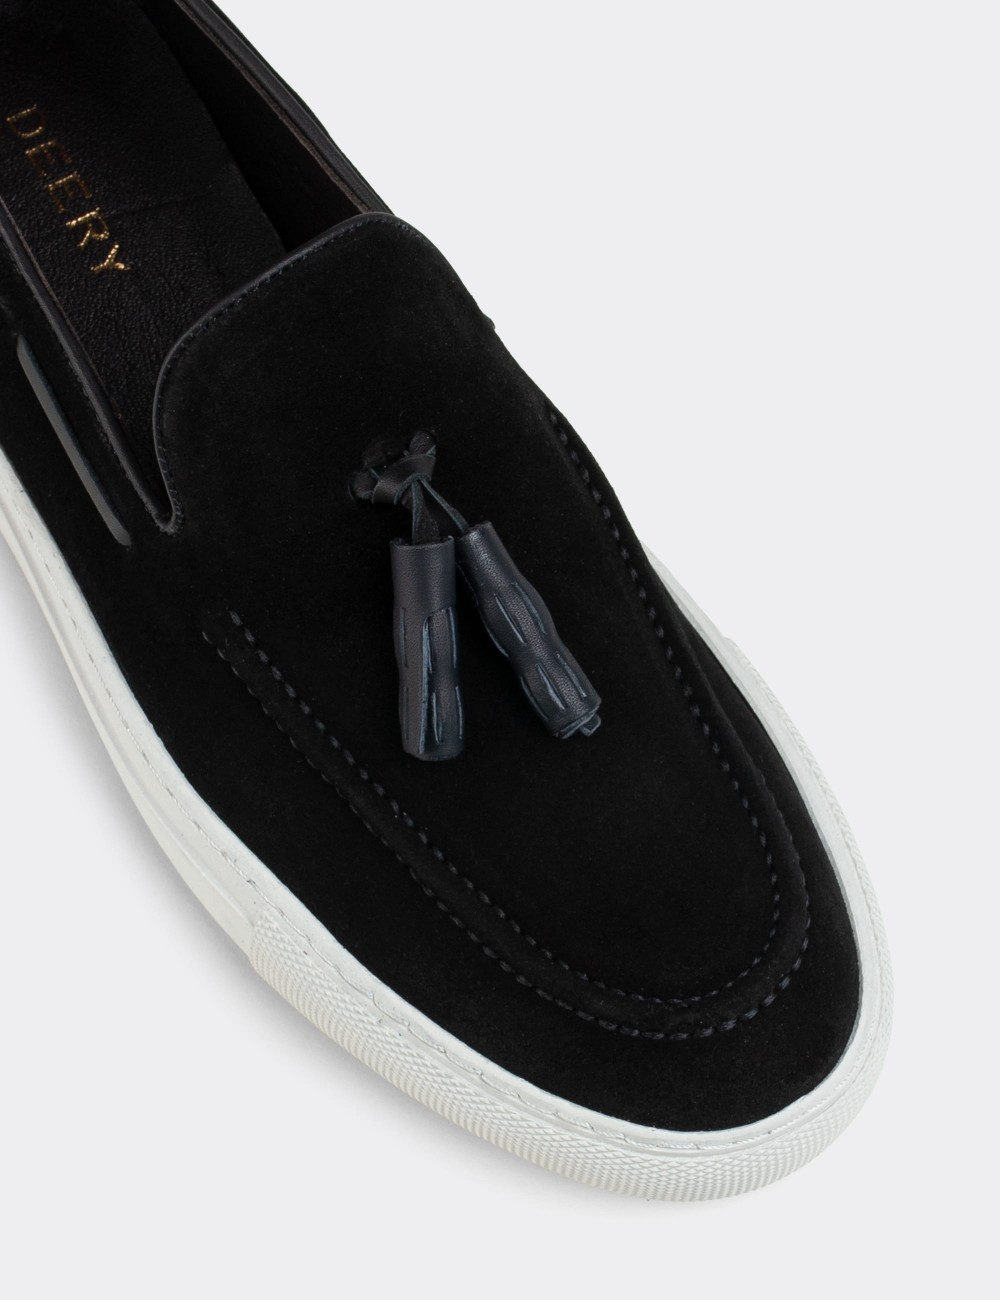 Black Suede Leather Loafers - 01836MSYHC01